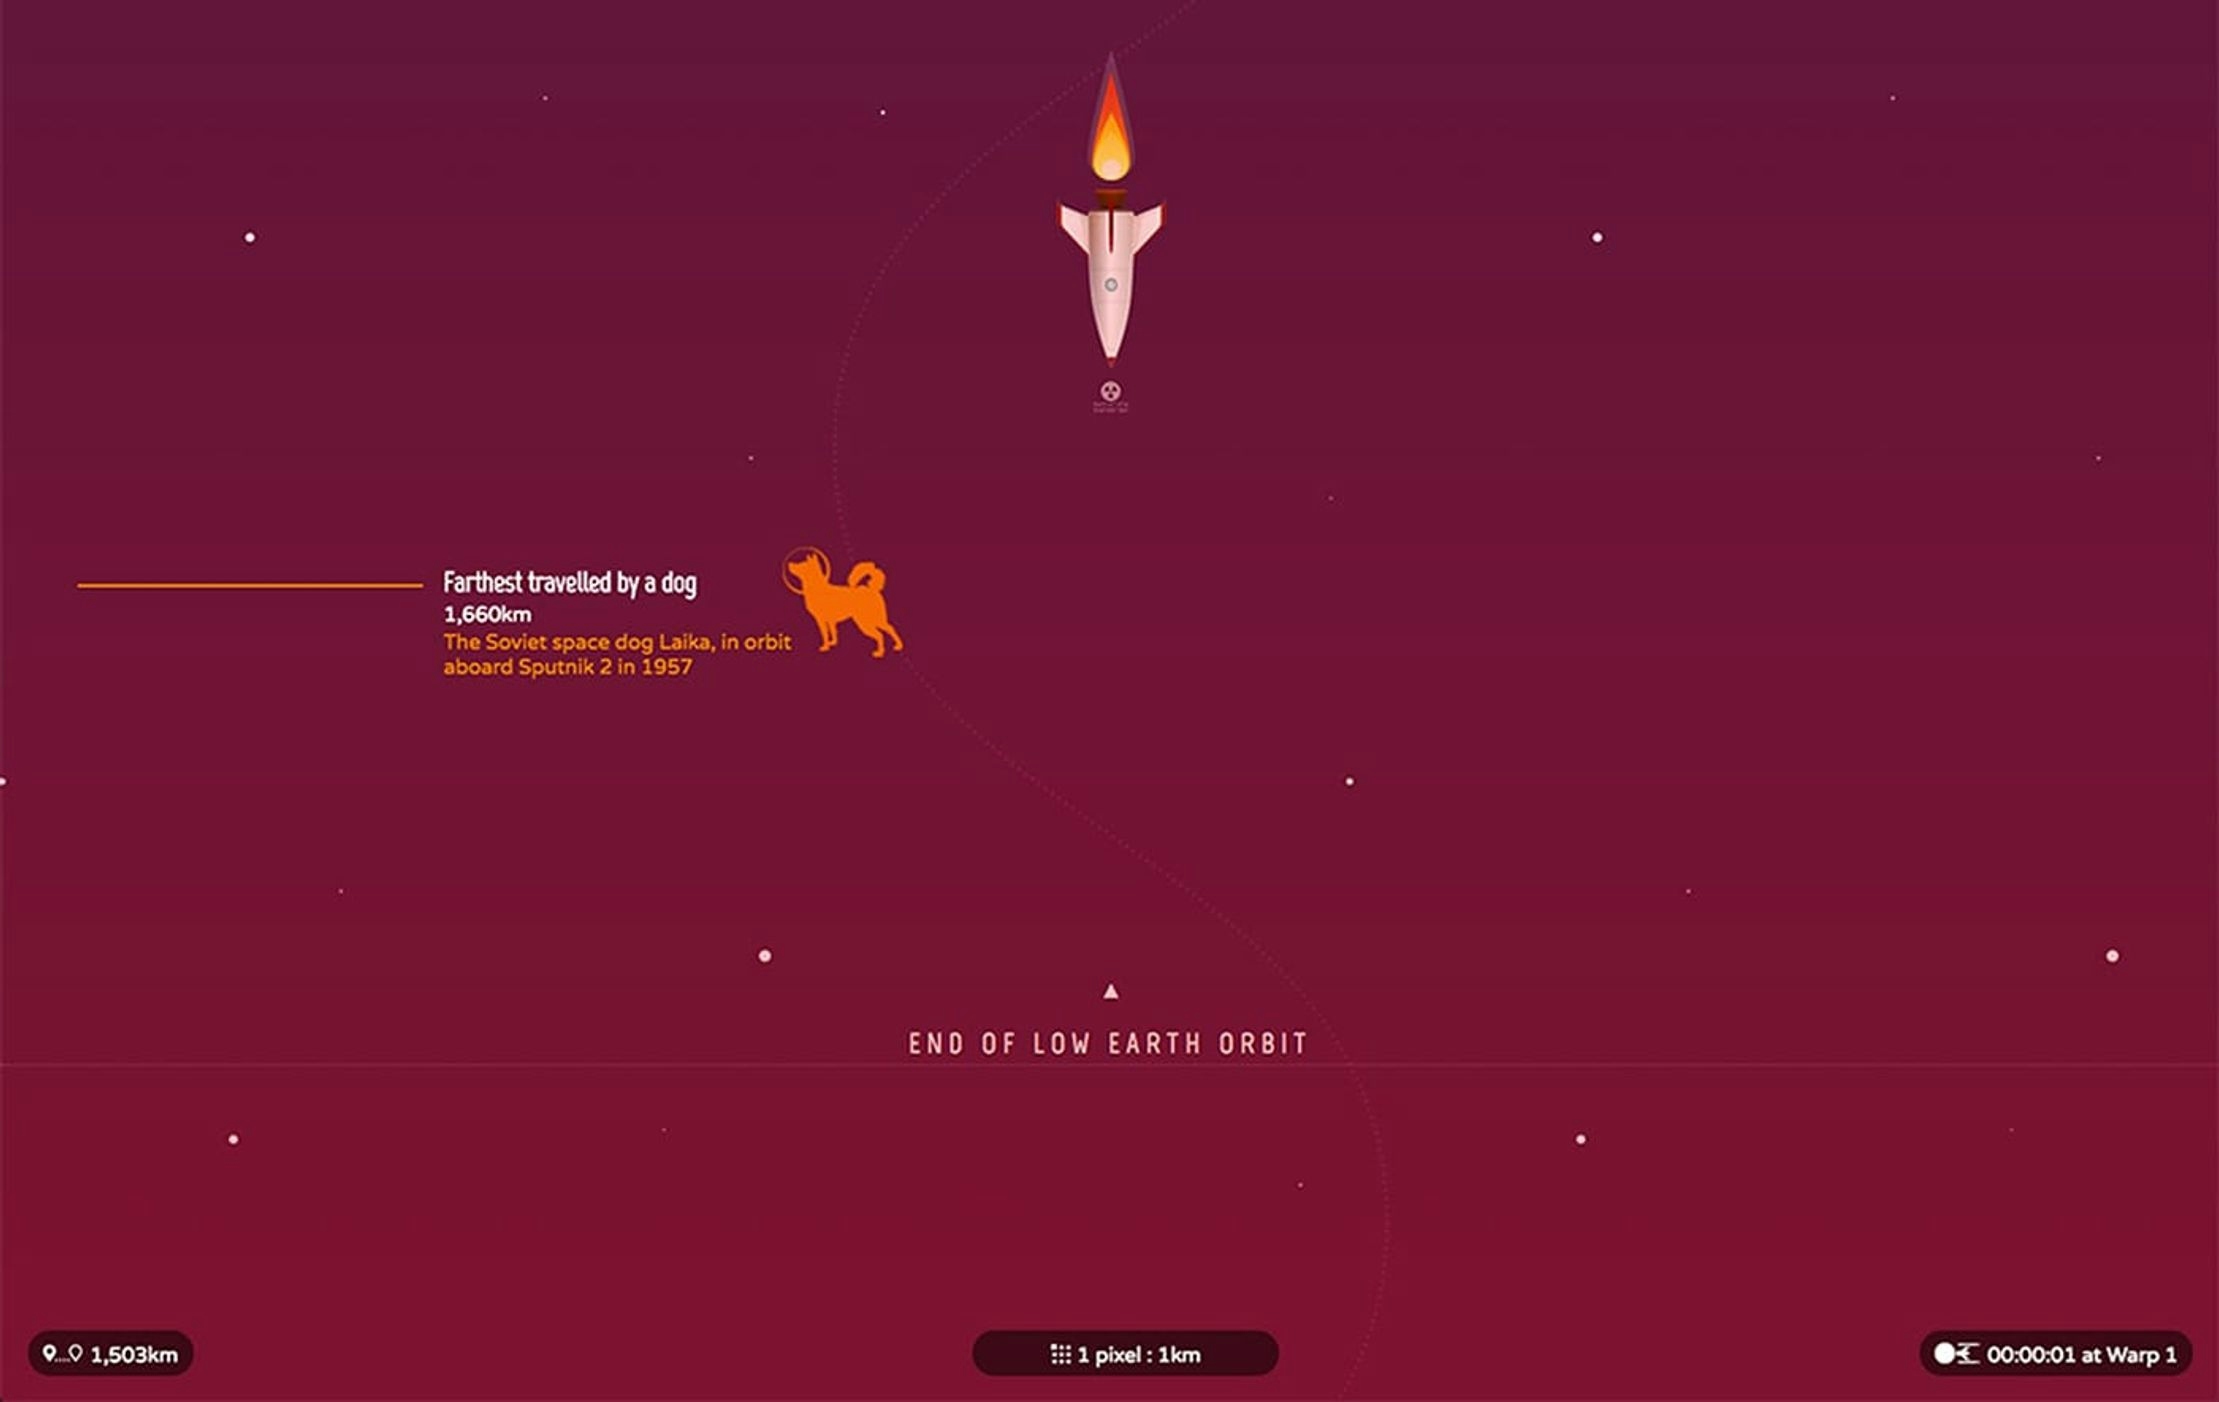 An image from the Space Race fantastic voyage. It shows a rocket flying down the screen. Ahead of the rocket to the left of the page is an icon of a dog in a space helmet. It's accompanied by the text 'Farthest reavelled by a dog 1,660km. The Soviet space dog Laika in orbit aboard Sputnik 2 in 1957.'